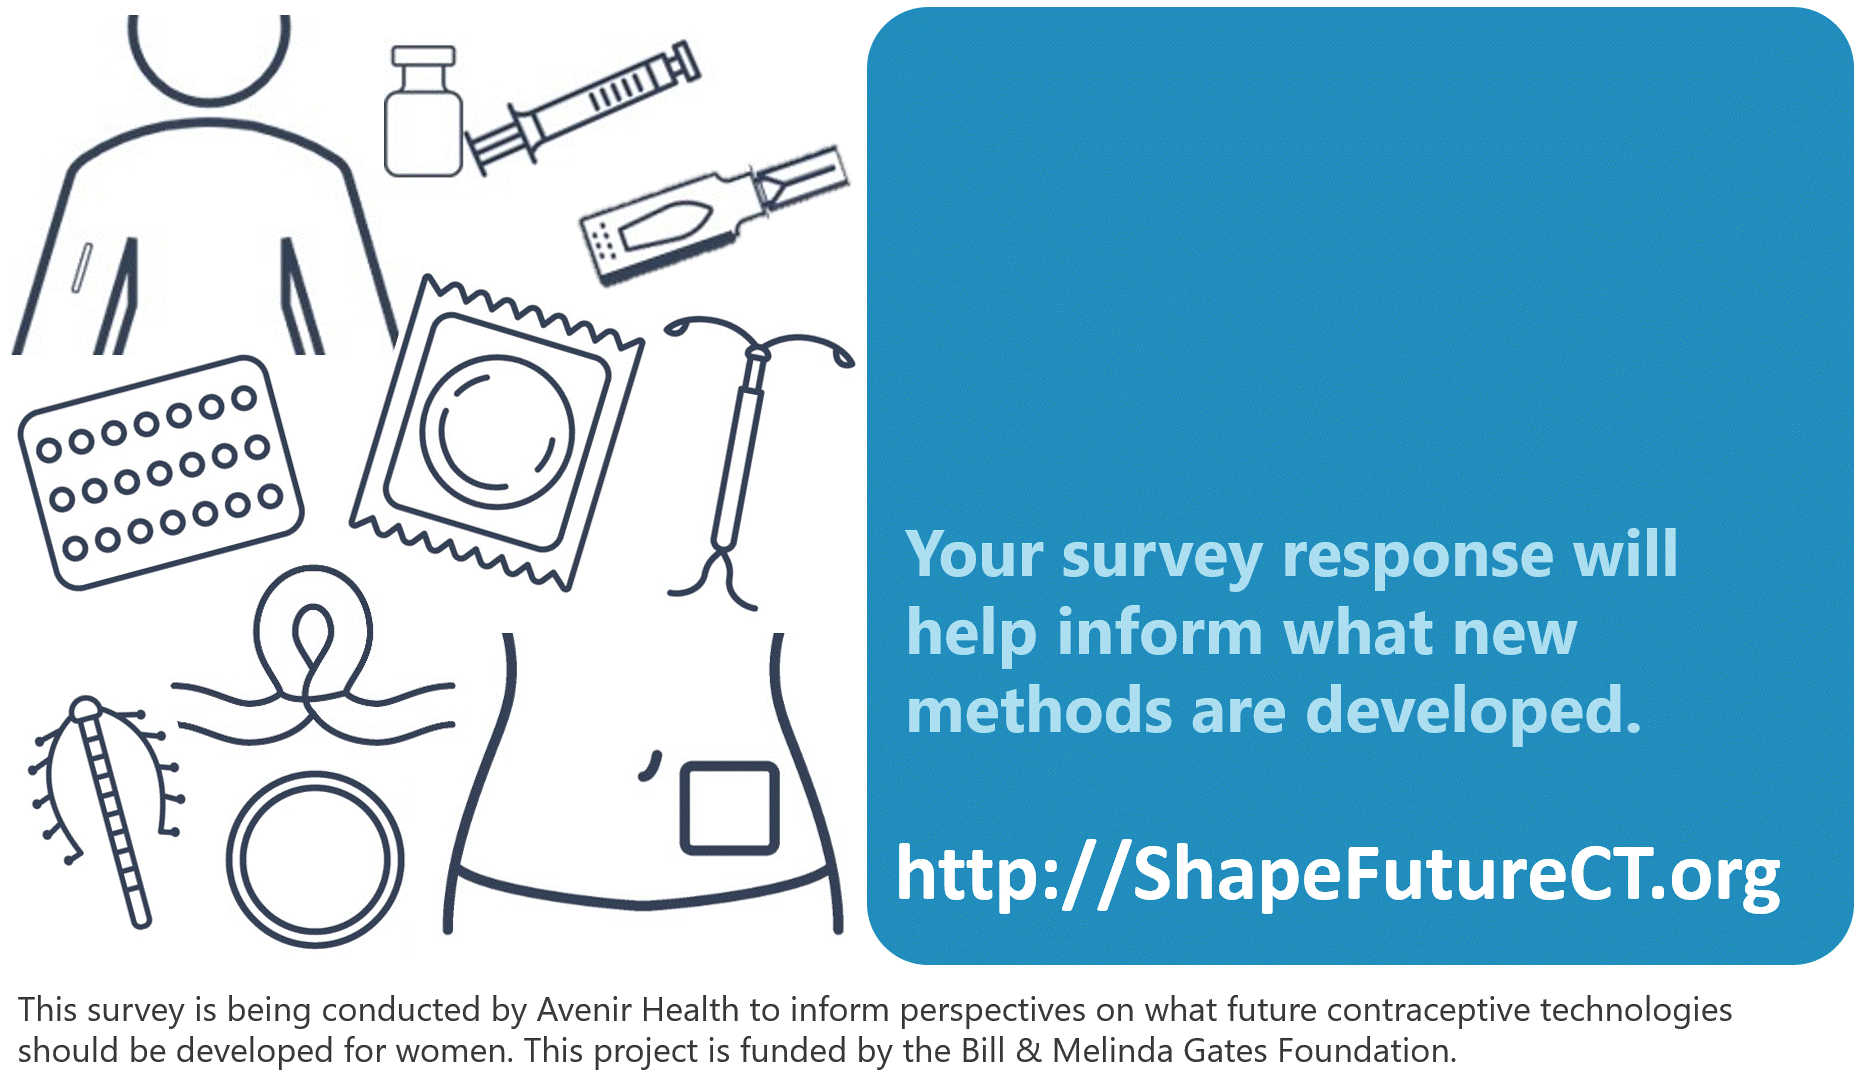 An illustration of a number of forms of birth control alongside the words, "Your survey response will help inform what new methods are development. http://ShapeFutureCT.org"